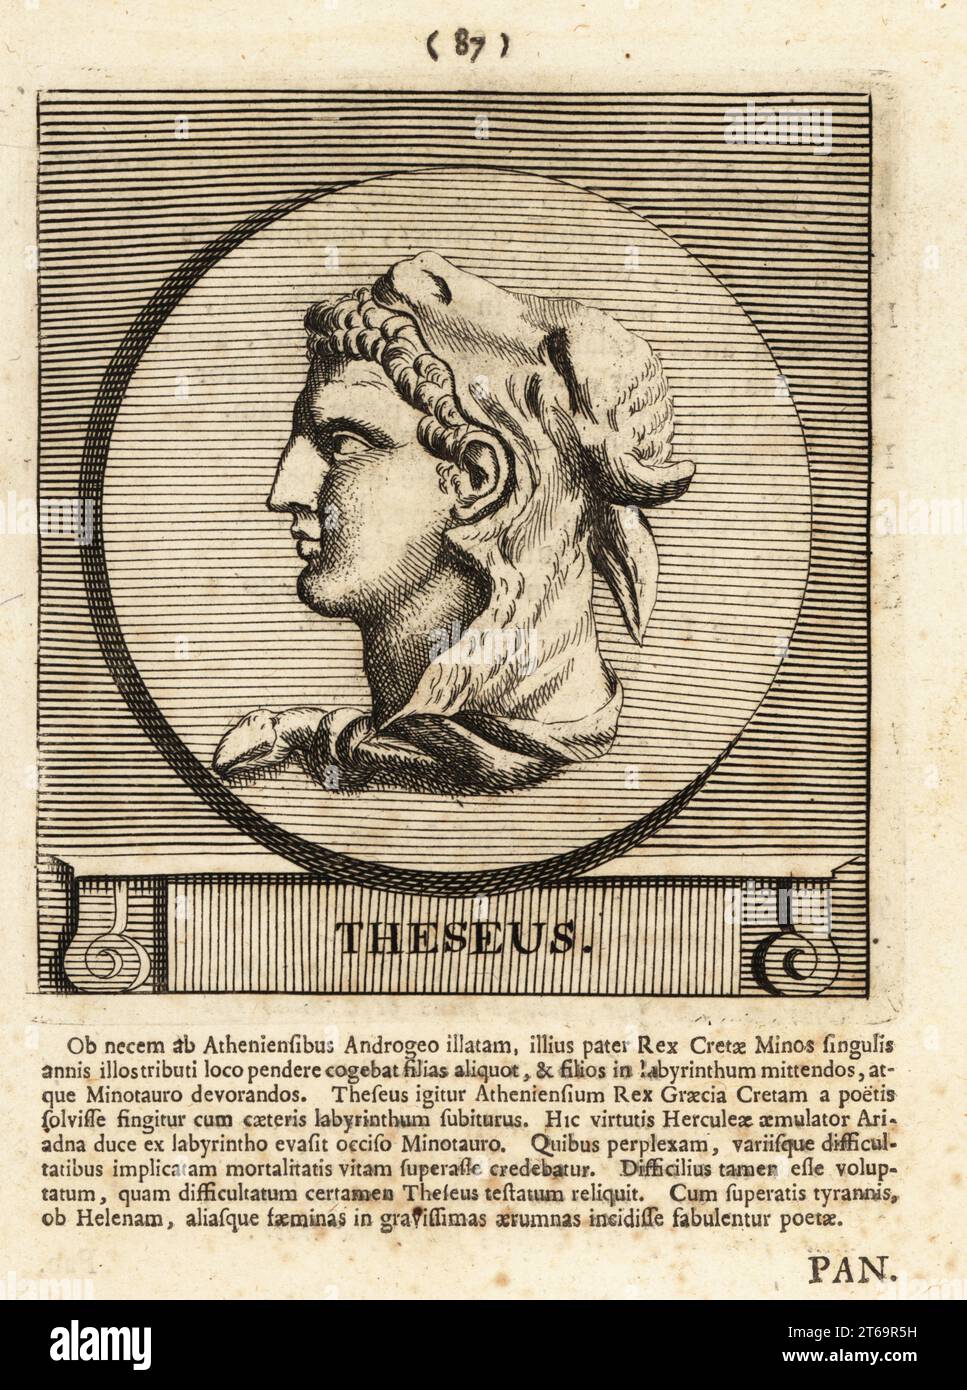 Theseus, mythical king and founder-hero of Athens. Son of Aegeus, King of Athens (or of the god Poseidon) and mother Aethra.. He is wearing a bull's head and horns as a hood. Copperplate engraving by Pieter Bodart (1676-1712) from Henricus Spoors Deorum et Heroum, Virorum et Mulierum Illustrium Imagines Antiquae Illustatae, Gods and Heroes, Men and Women, Illustrated with Antique Images, Petrum, Amsterdam, 1715. First published as Favissæ utriusque antiquitatis tam Romanæ quam Græcæ in 1707. Henricus Spoor was a Dutch physician, classical scholar, poet and writer, fl. 1694-1716. Stock Photo